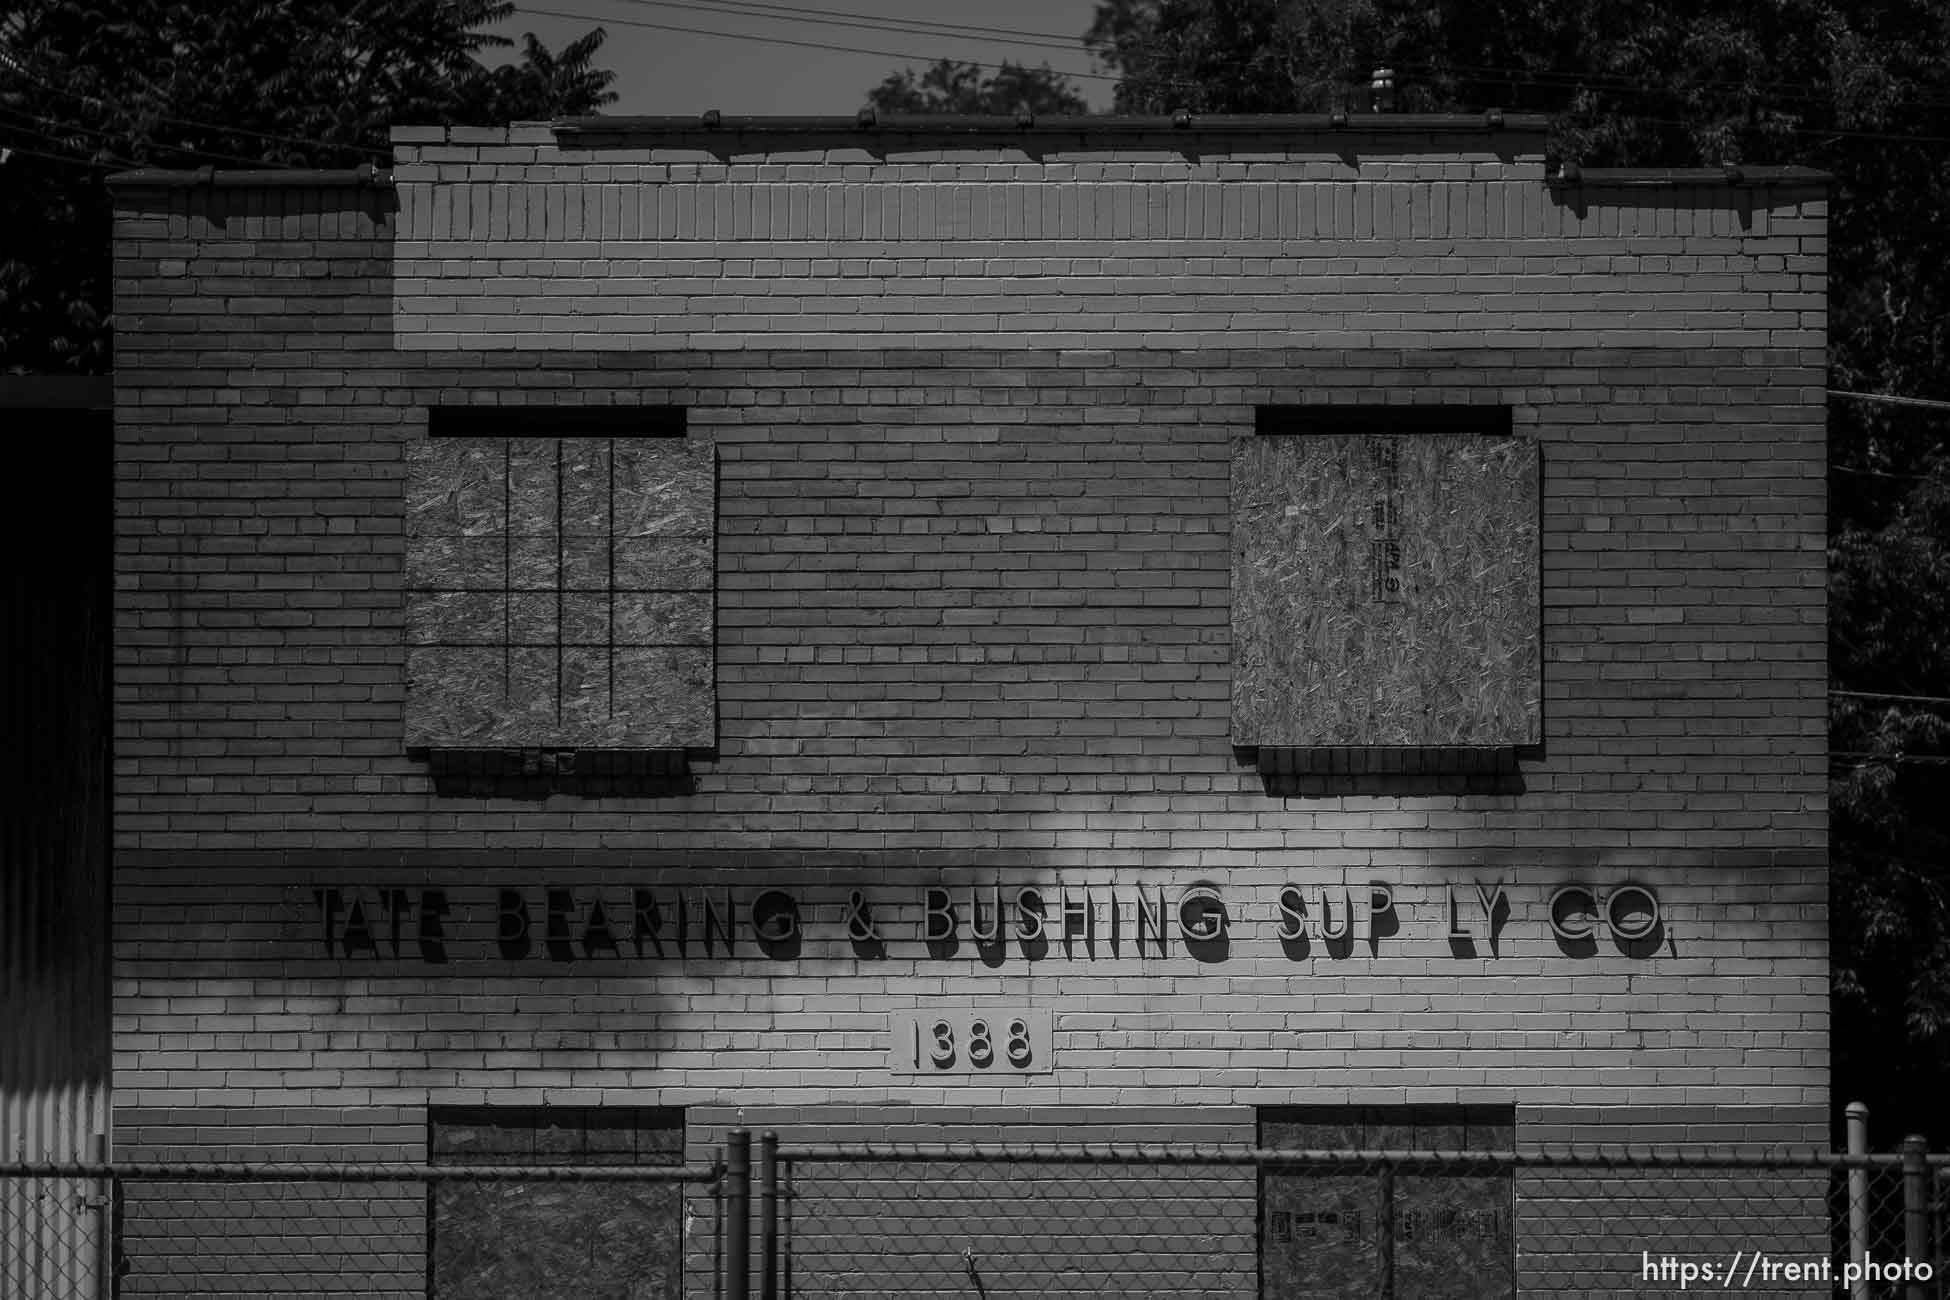 state bearing and brushing supply co, Thursday July 13, 2023.